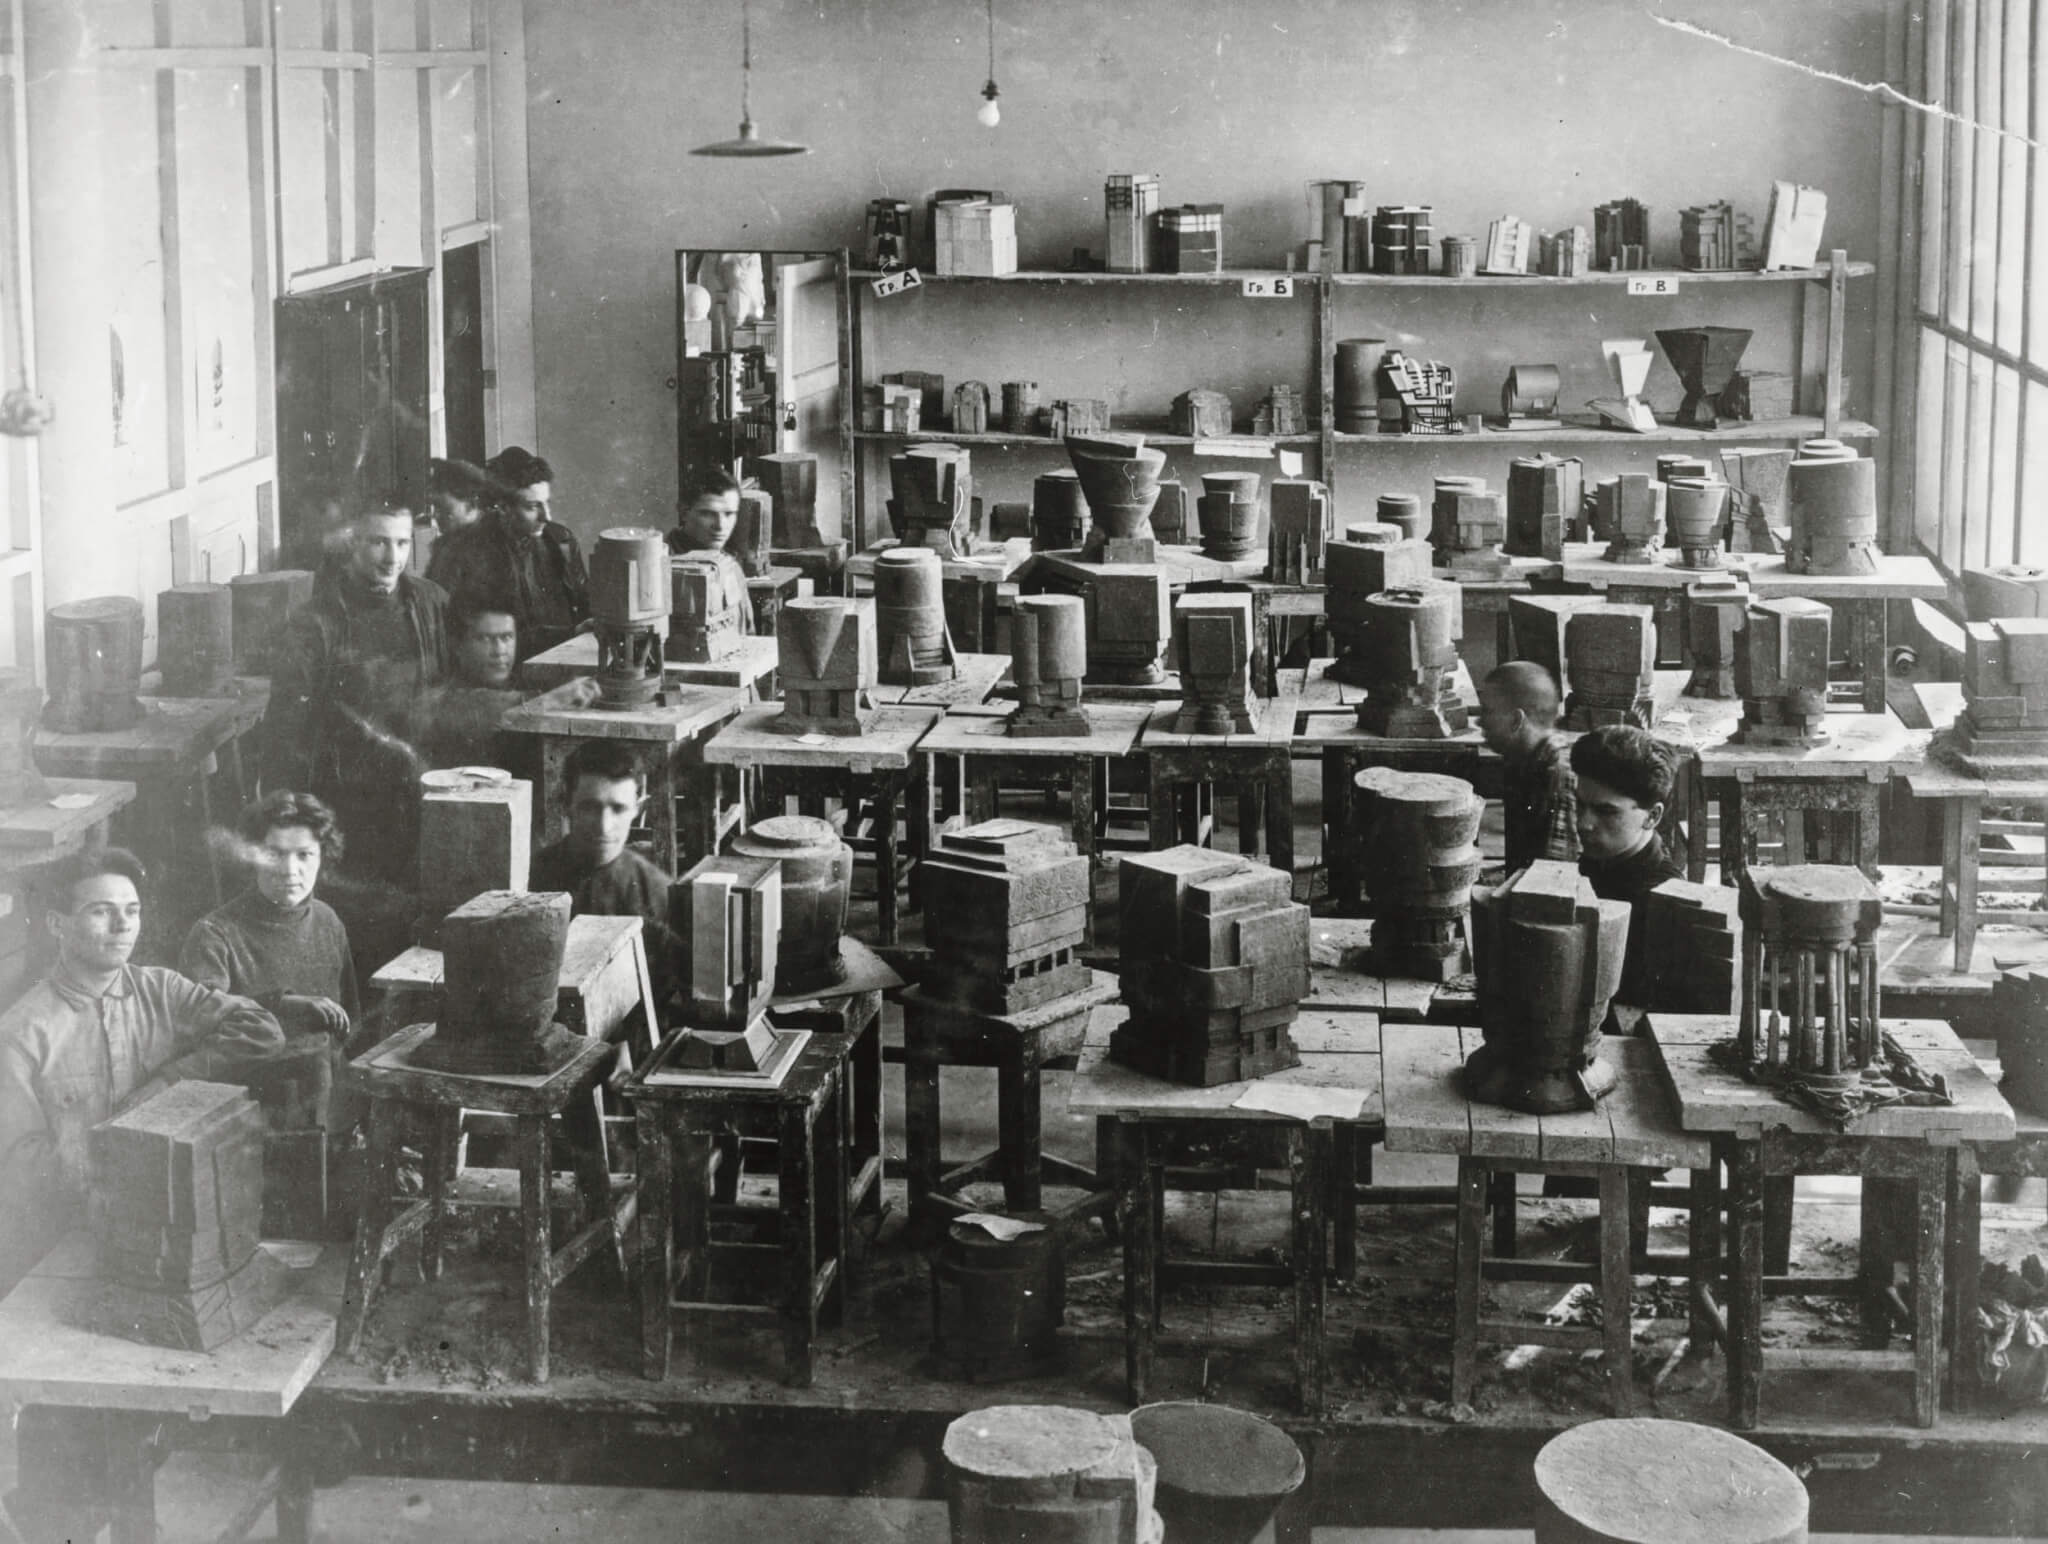 Students with their work at Vkhutemas